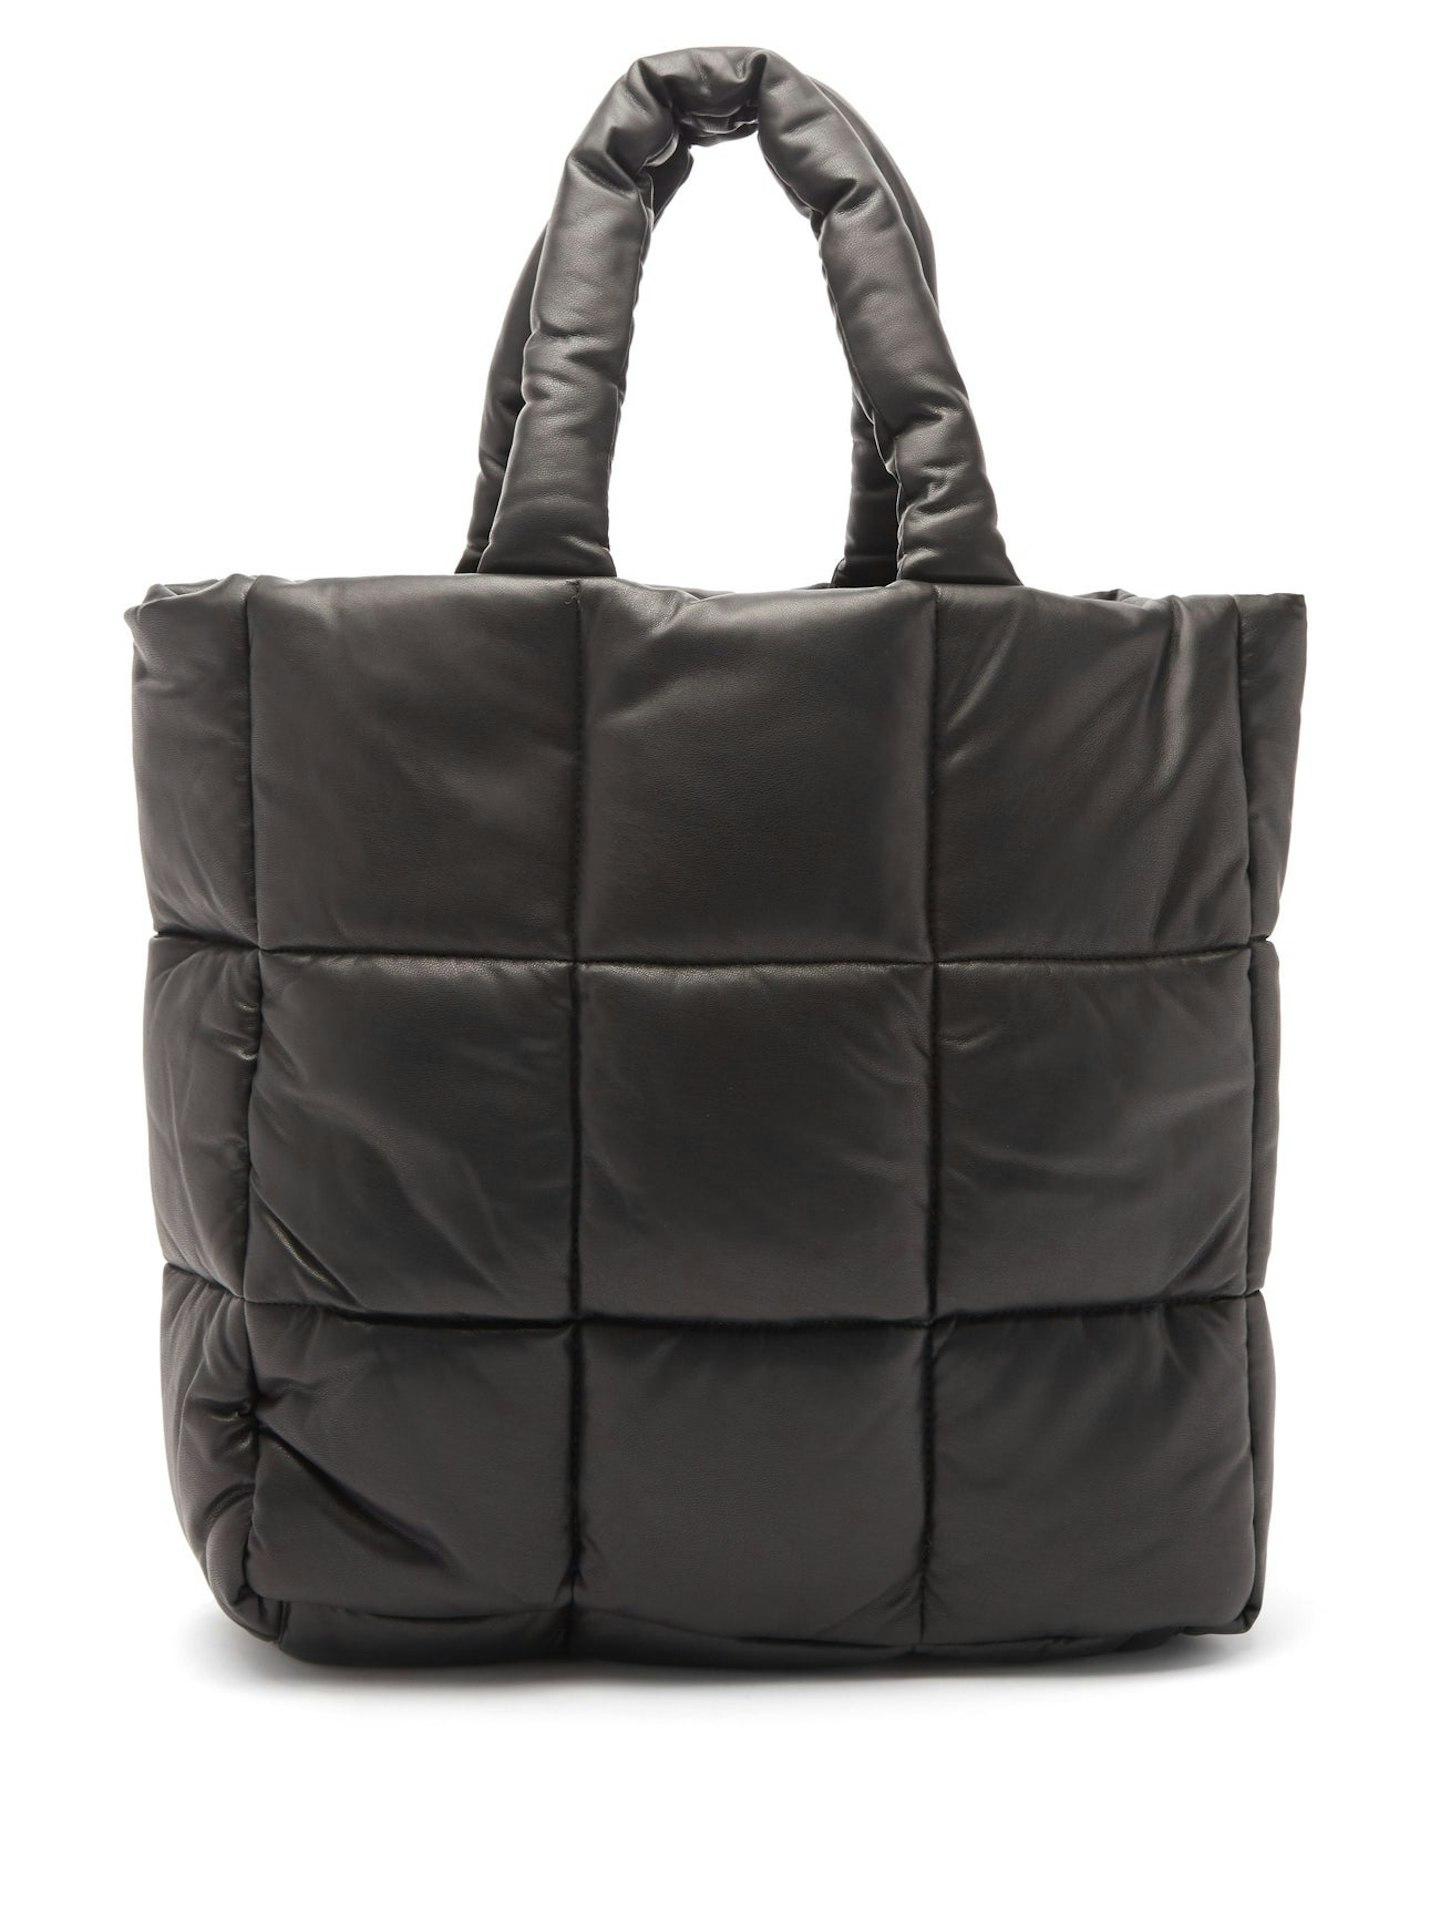 Stand Studio, Assante quilted faux-leather tote bag, WAS £330 NOW £247.50